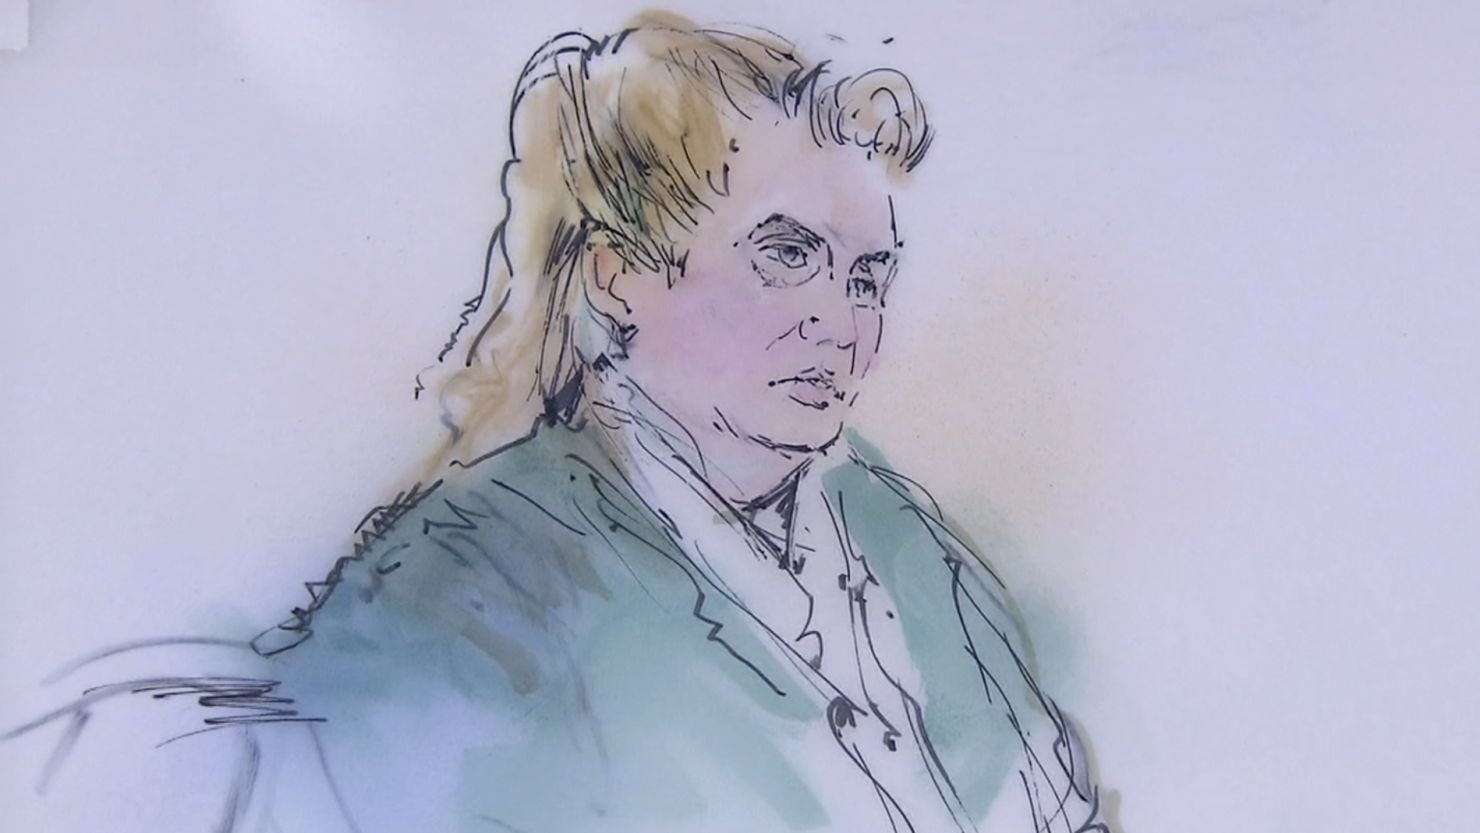 A magistrate judge said she would appoint a federal public defender for Dorothee Burkhart.